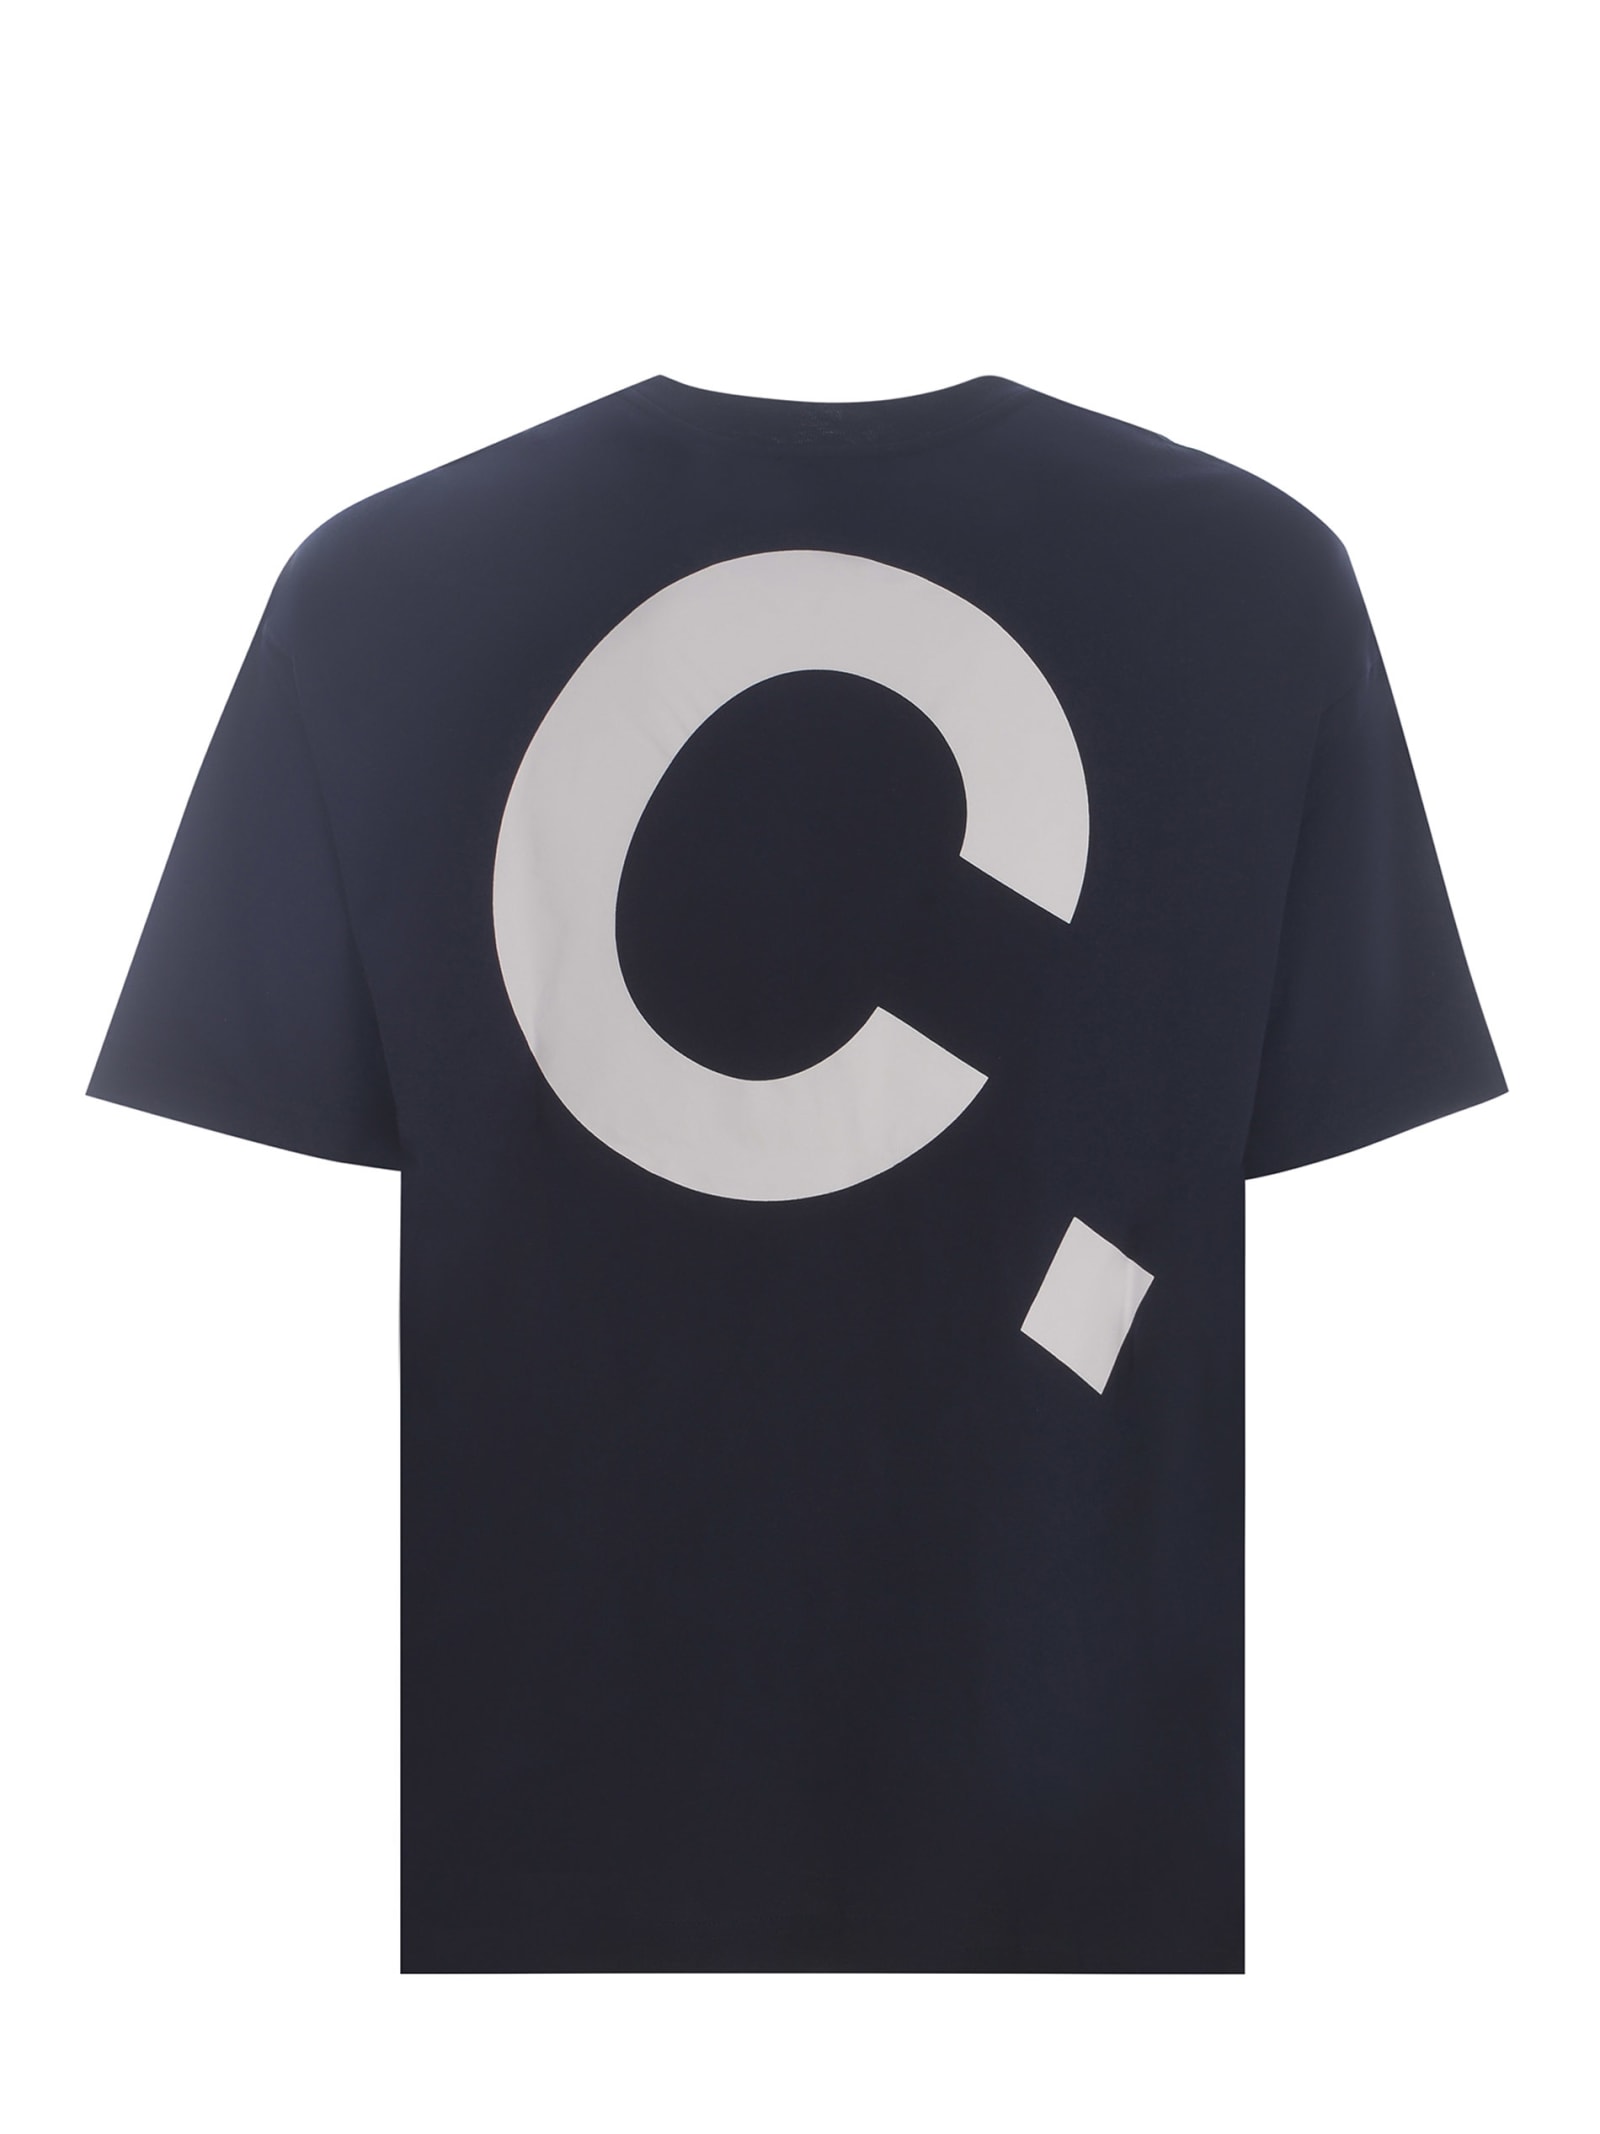 Shop Apc T-shirt A.p.c. Lisandre Made Of Cotton In Blue